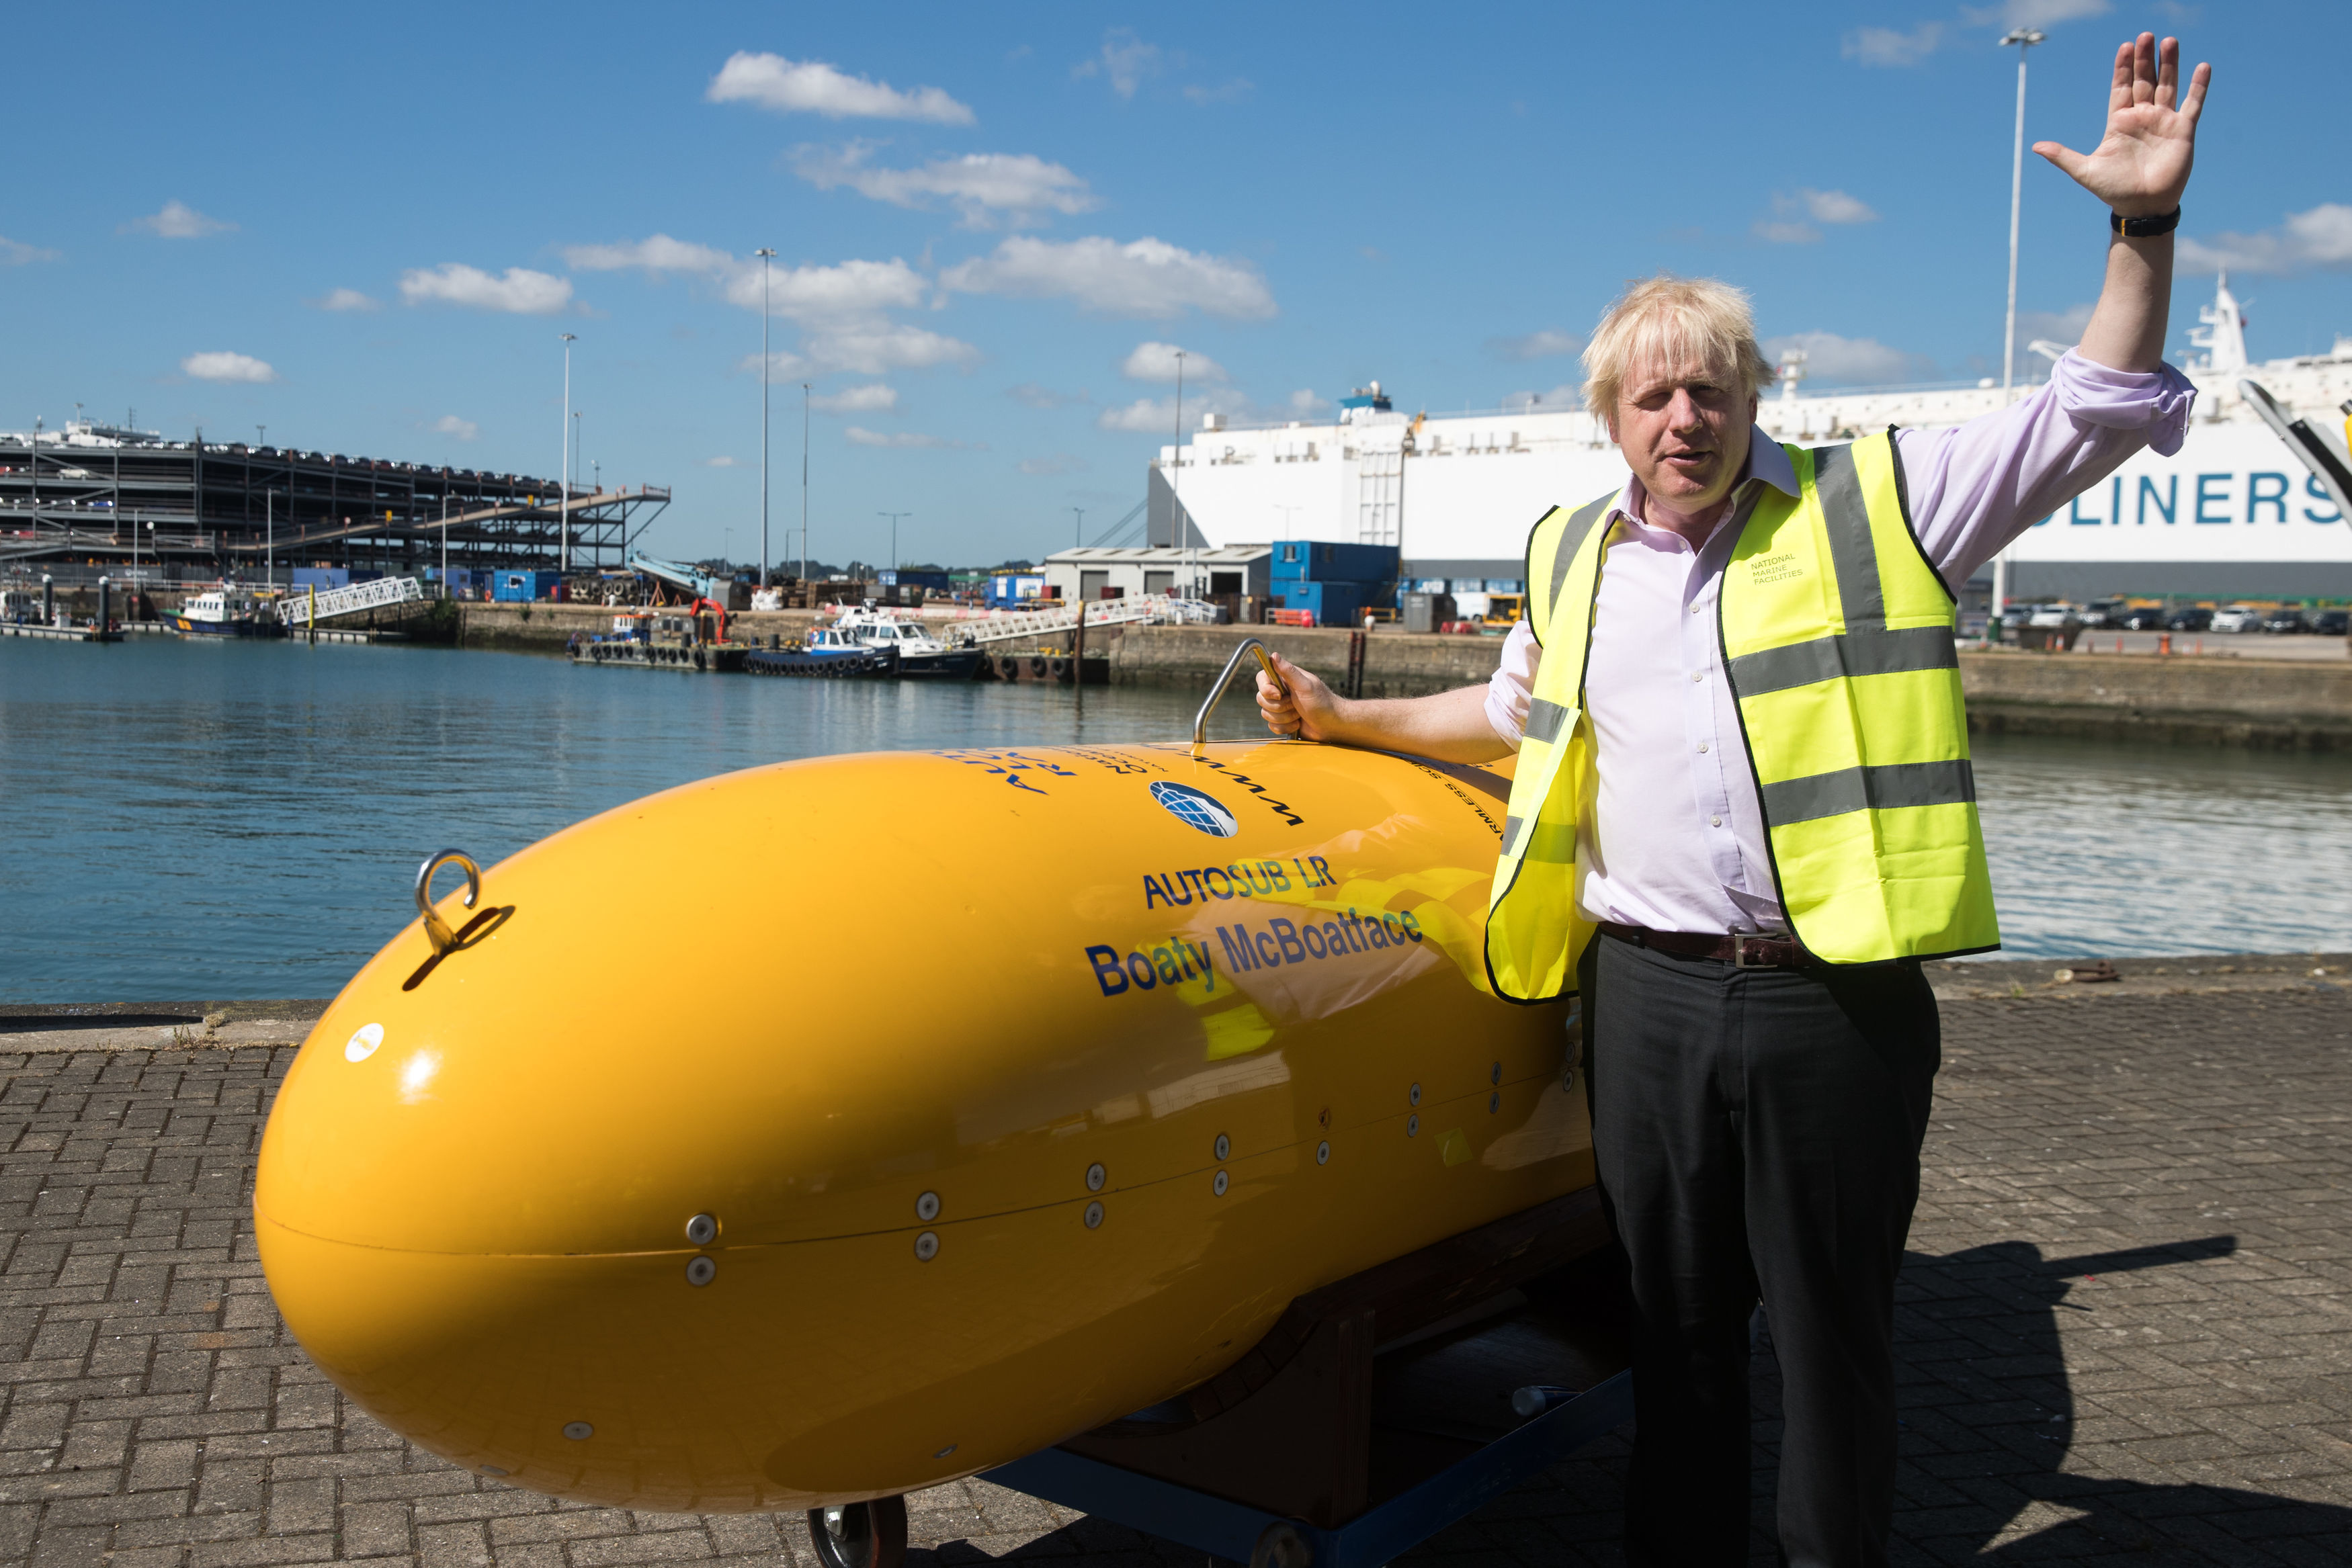 Former Foreign Secretary, Boris Johnson, with Boaty McBoatface, an autonomous underwater vehicle used for scientific research